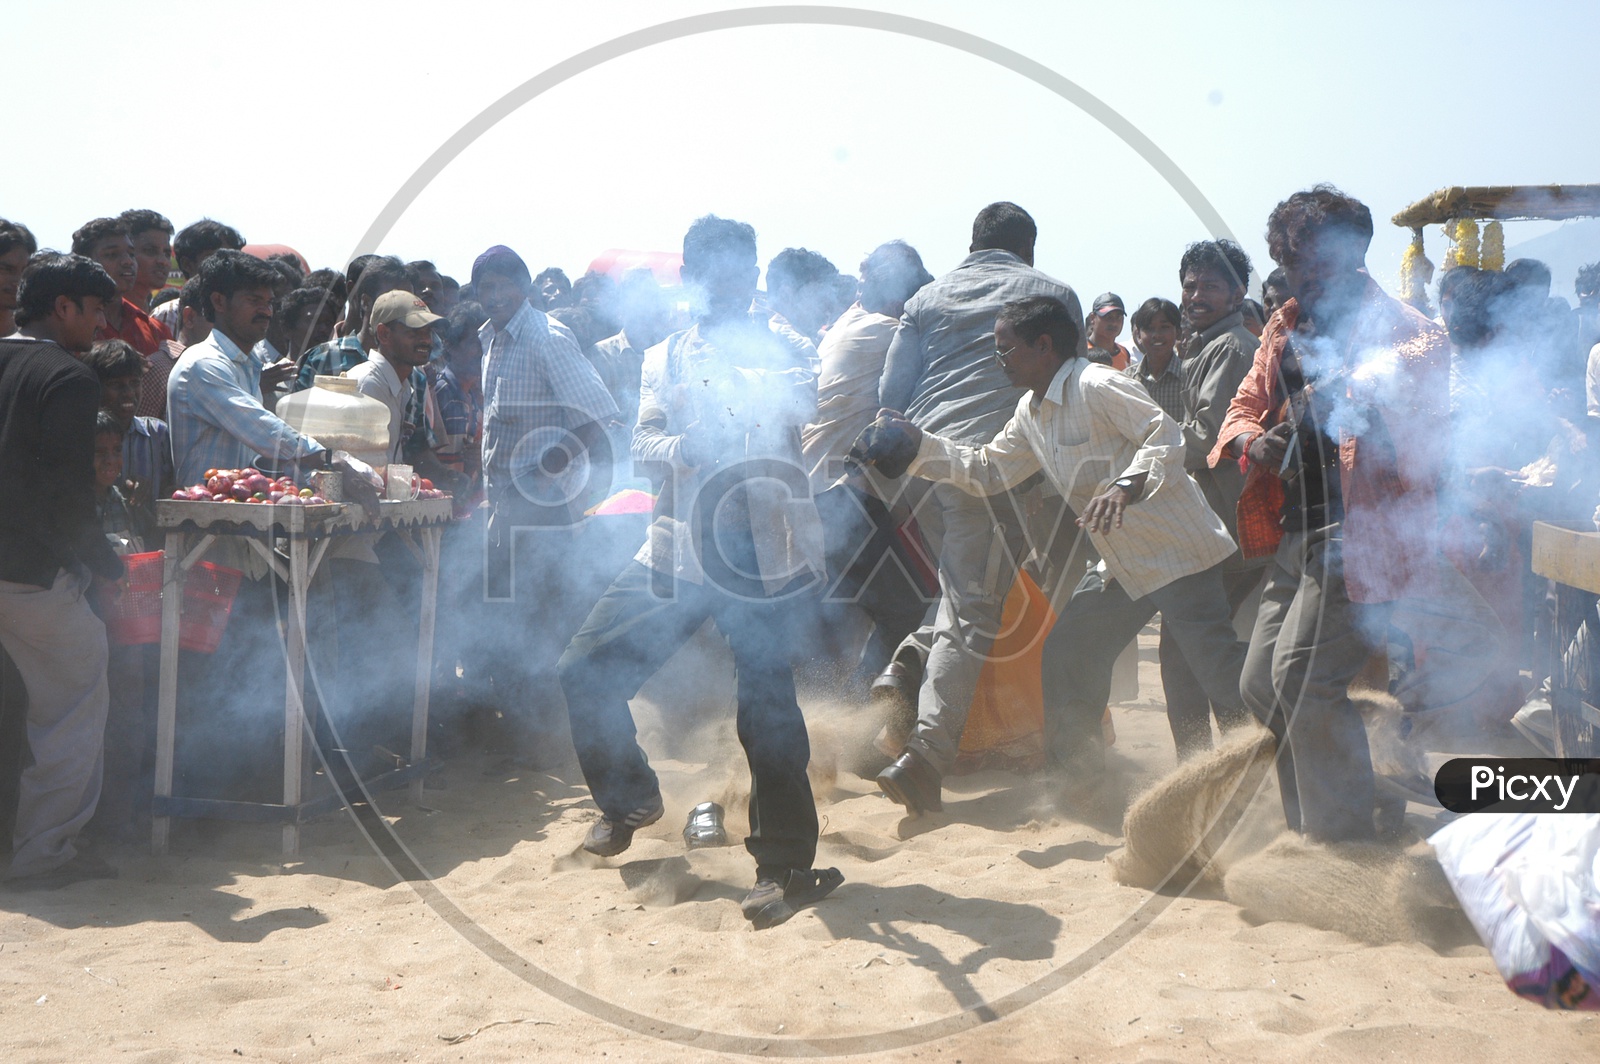 Action or Fight Sequence Shooting near Beach